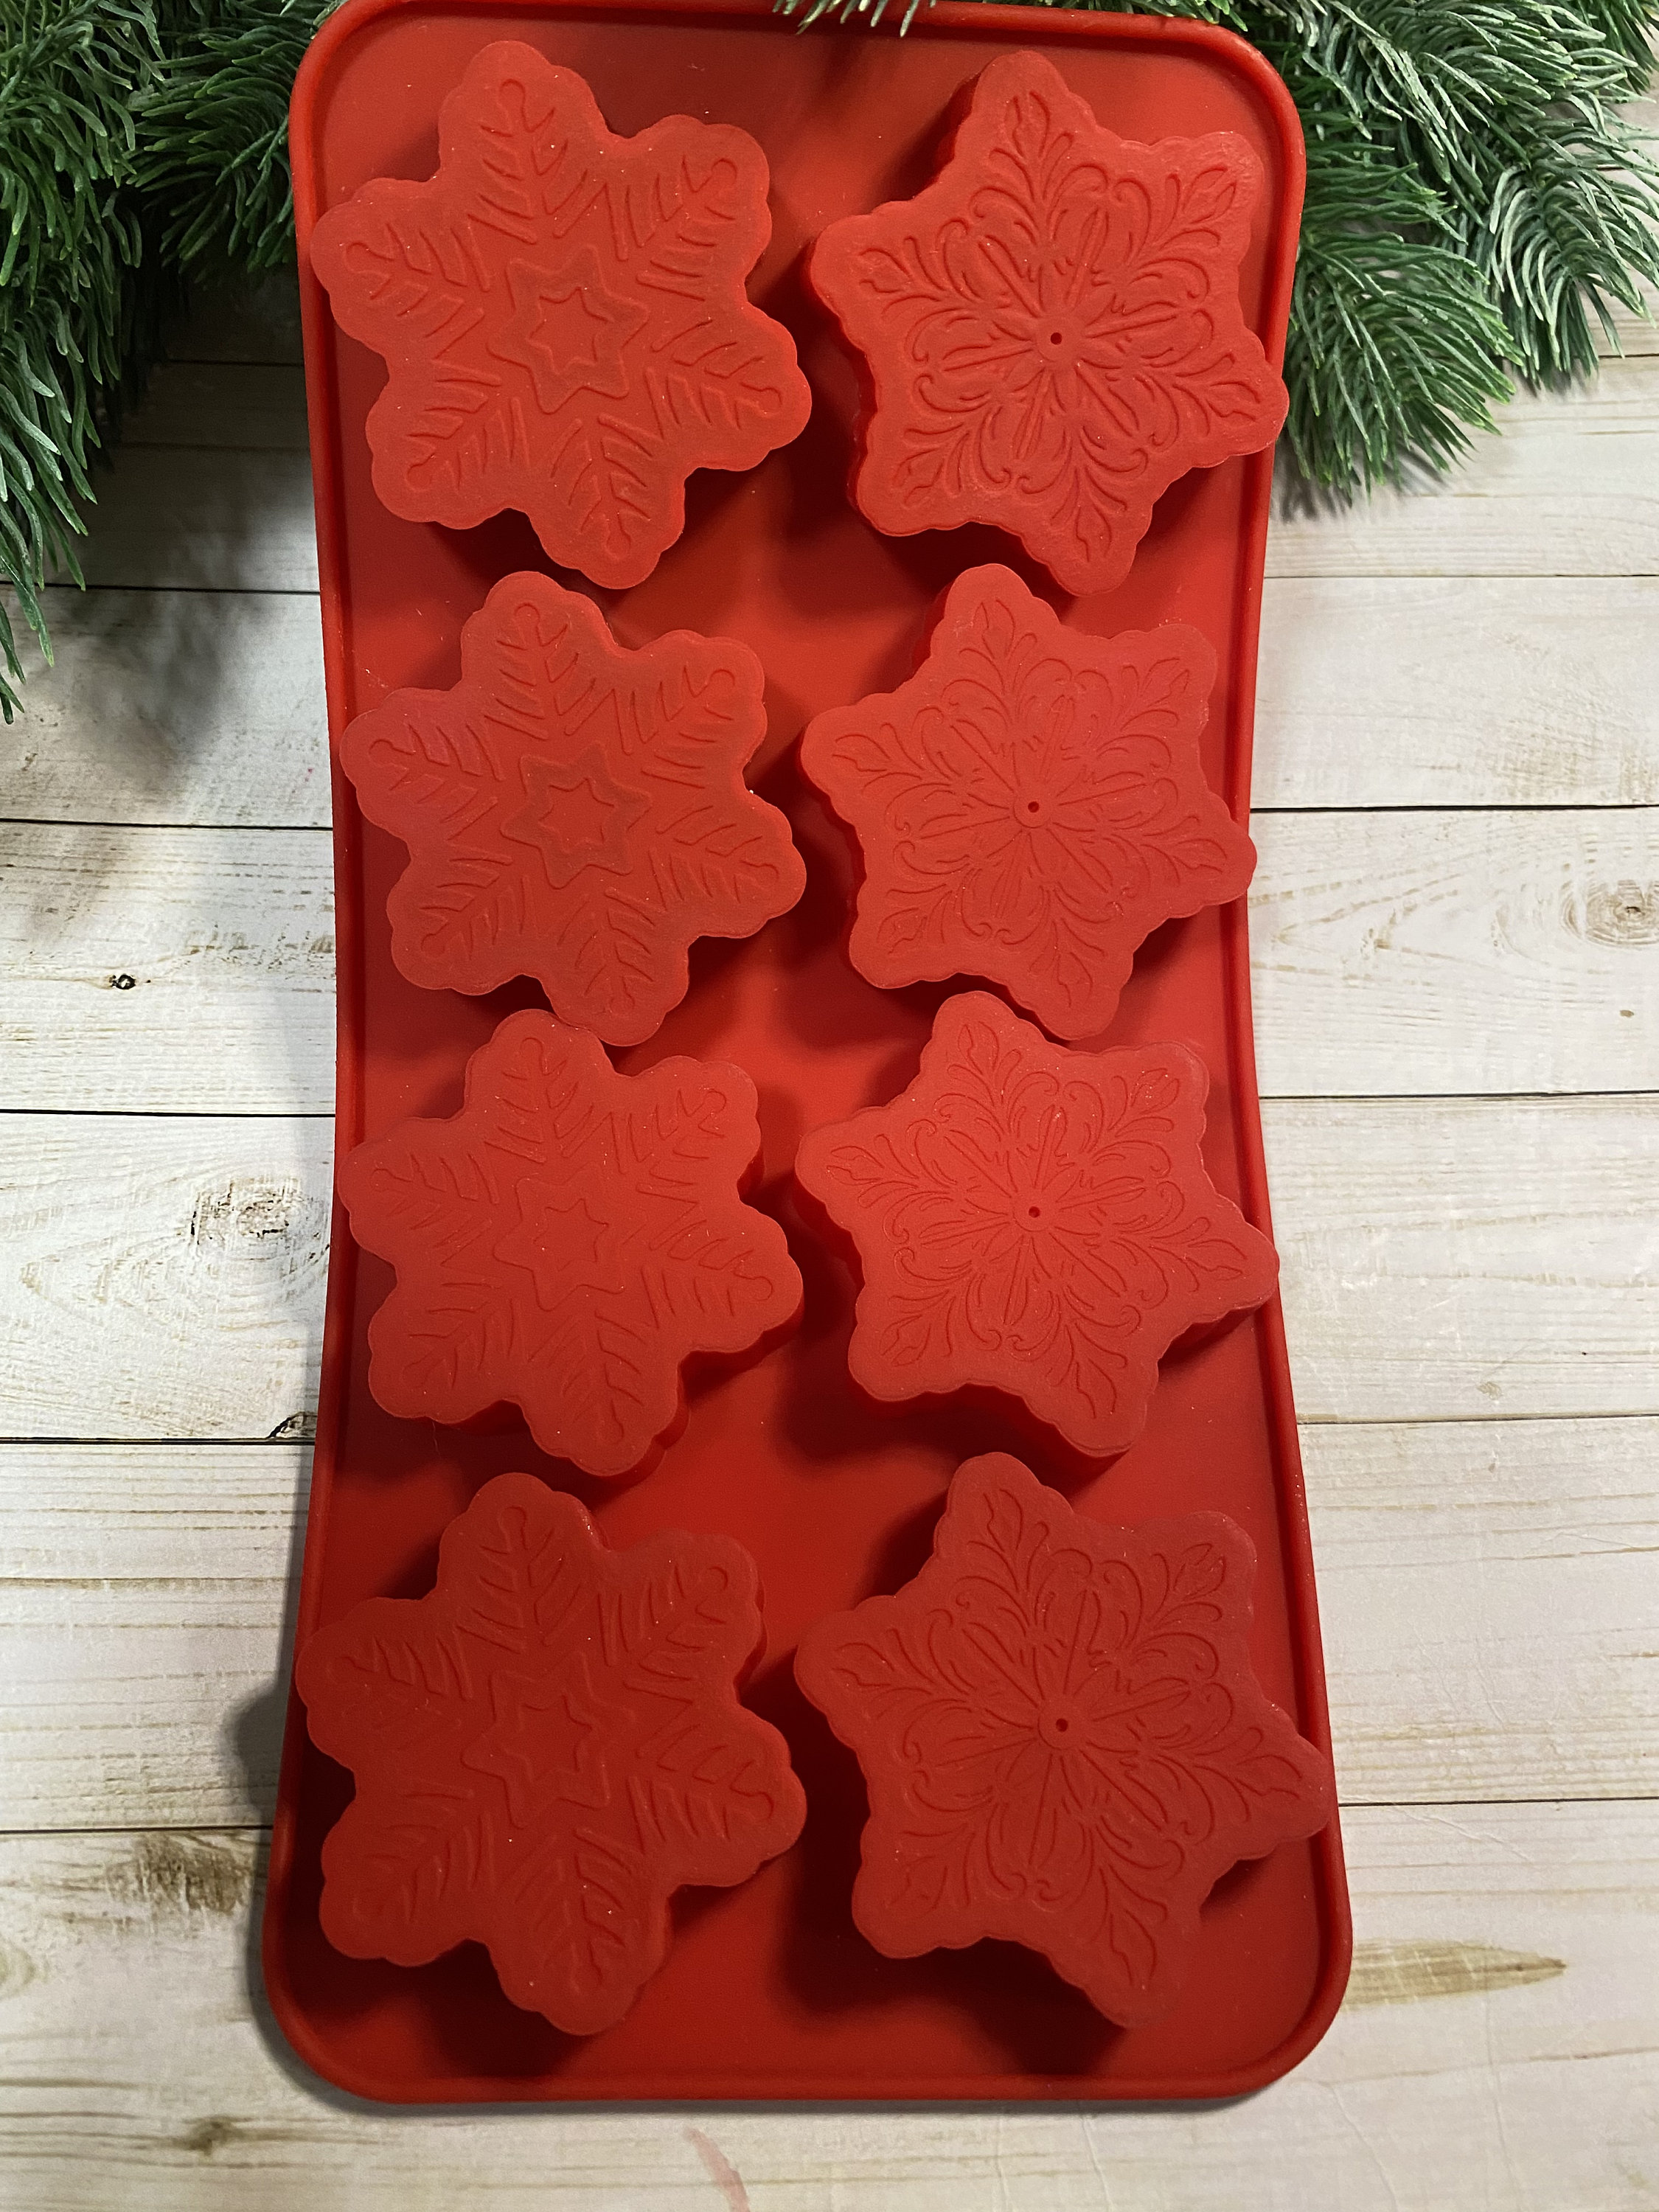 SNOWFLAKE SILICONE MOLD, 8 Cavities, Candy Mold, 2 Pieces per Pack. 